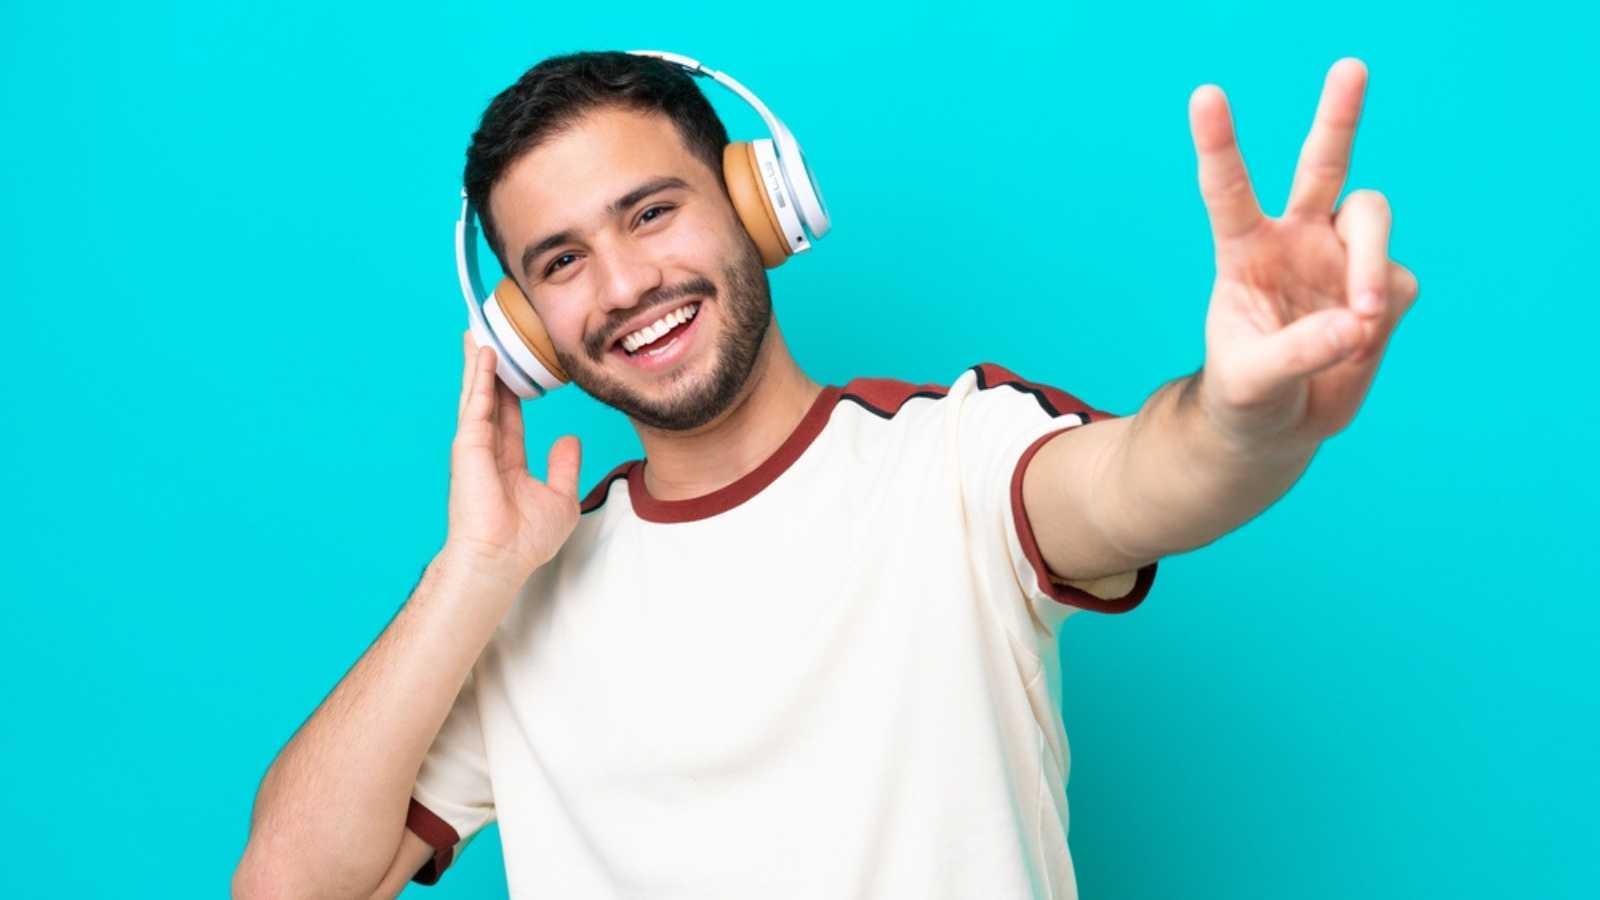 Man Showing Hands For Music